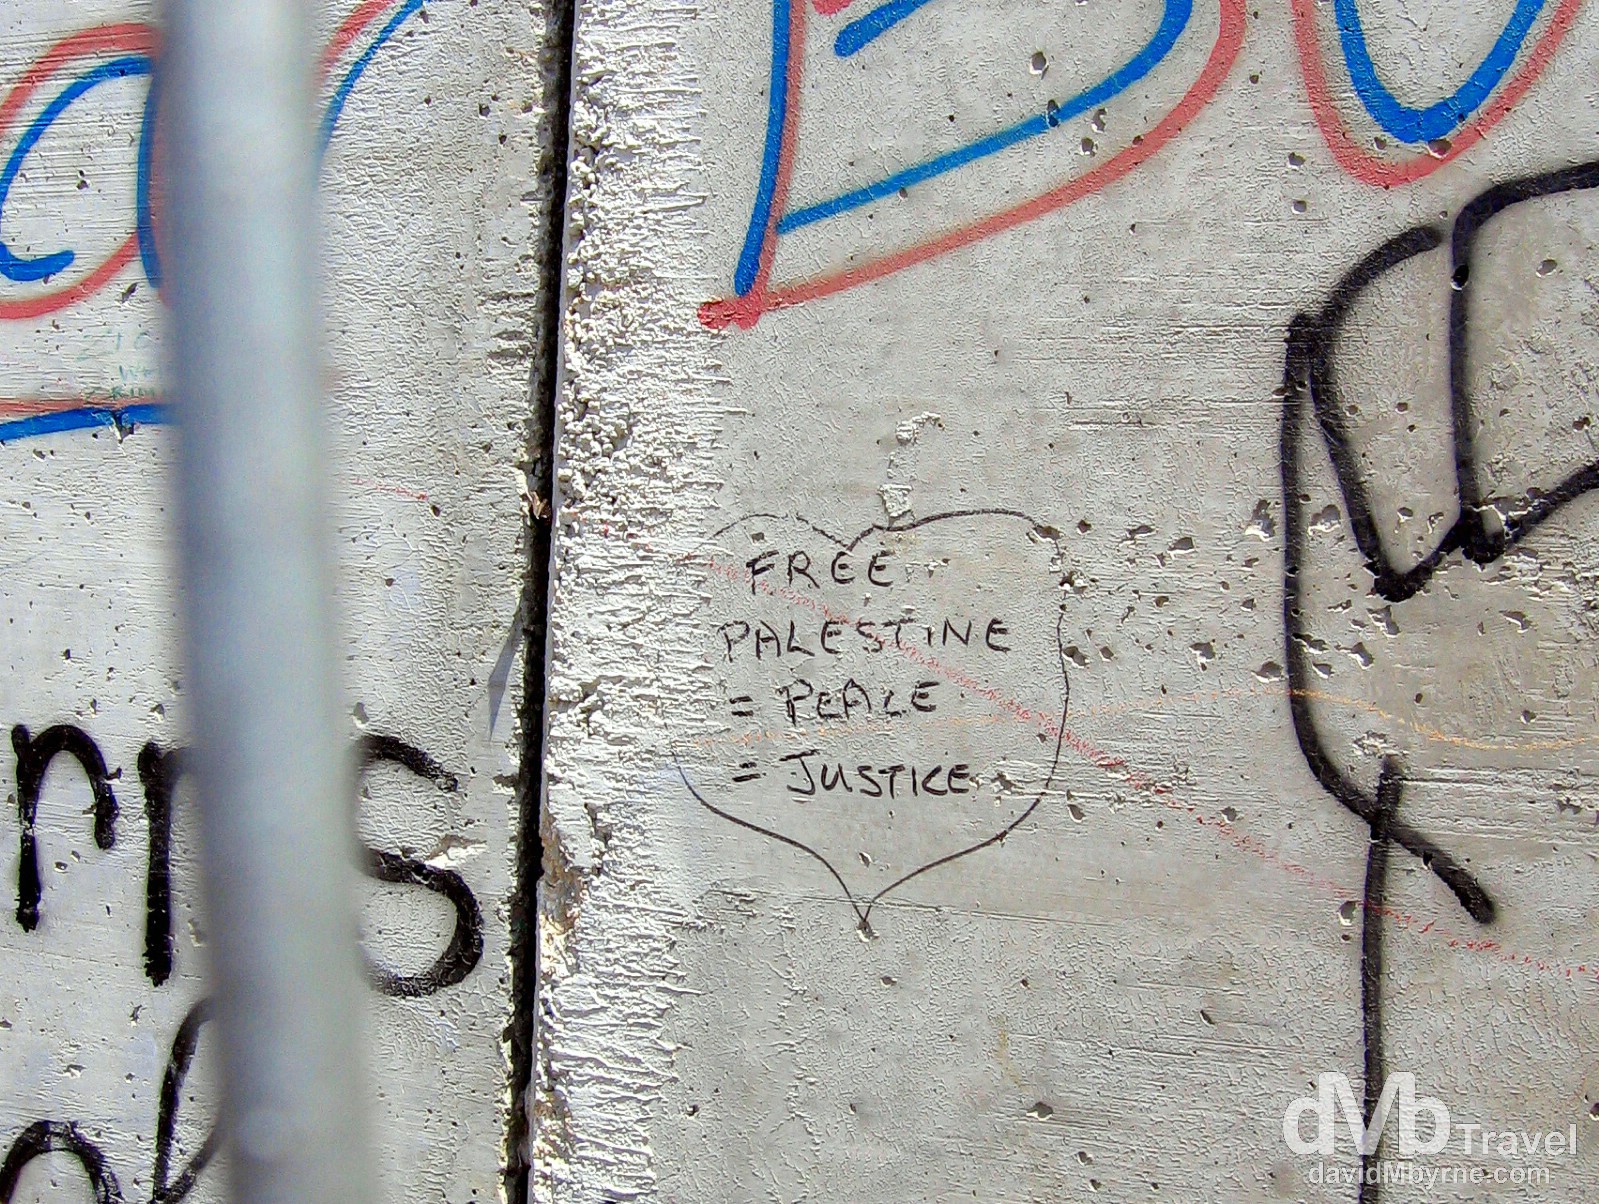 Free Palestine. A section of the heavily guarded wall separating the Palestinian West Back from Israel. May 2, 2008. 